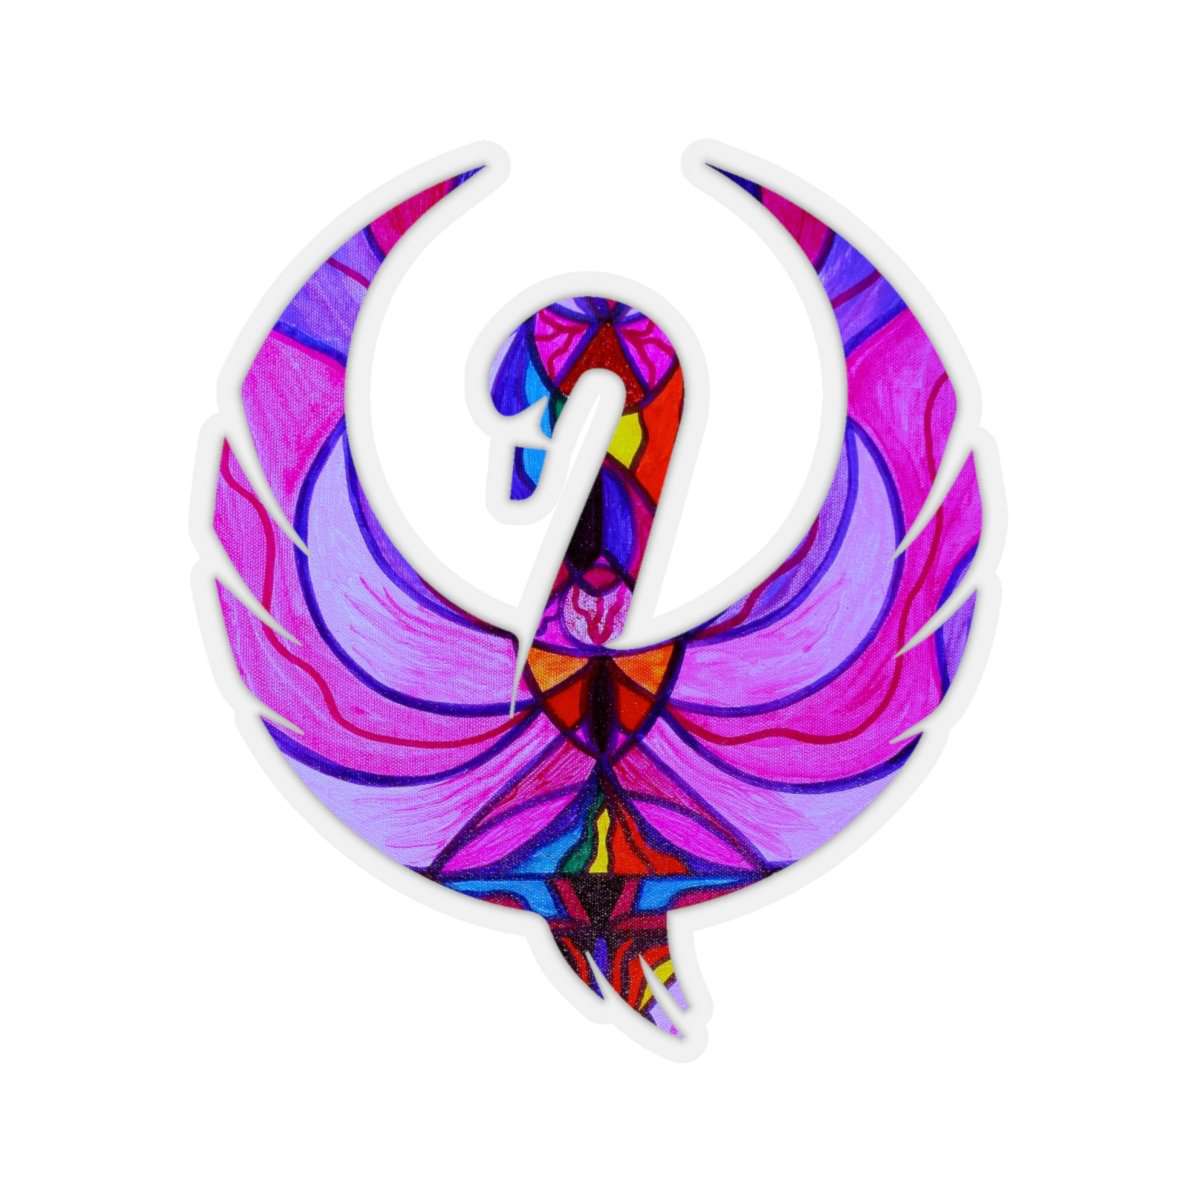 make-your-dreams-come-true-to-wear-divine-feminine-activation-swan-stickers-supply_12.jpg